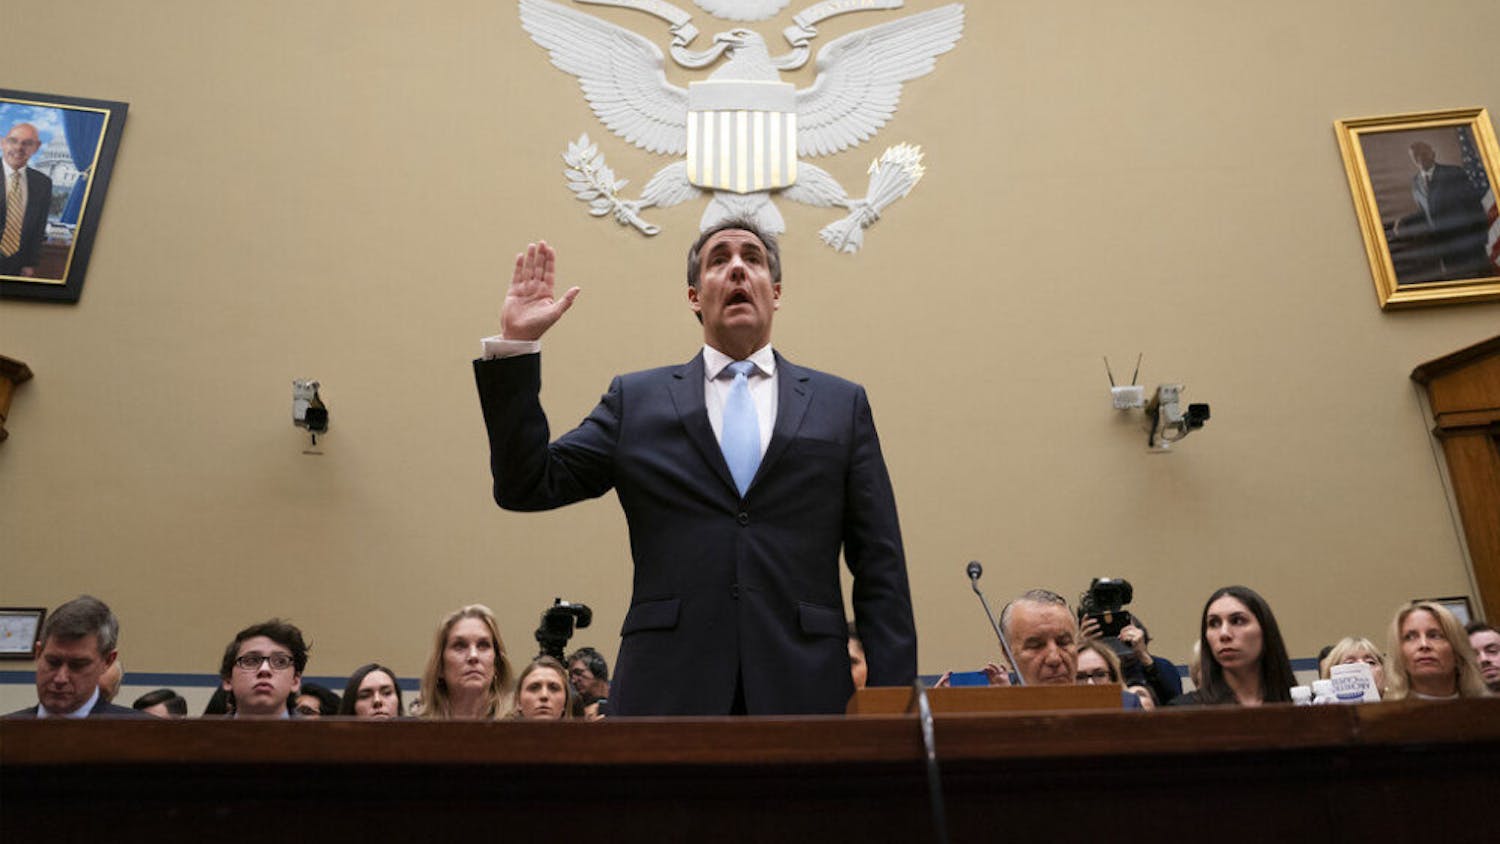 Michael Cohen, President Donald Trump's former personal lawyer, is sworn in to testify before the House Oversight and Reform Committee on Capitol Hill in Washington, Wednesday, Feb. 27, 2019. (AP Photo/J. Scott Applewhite)